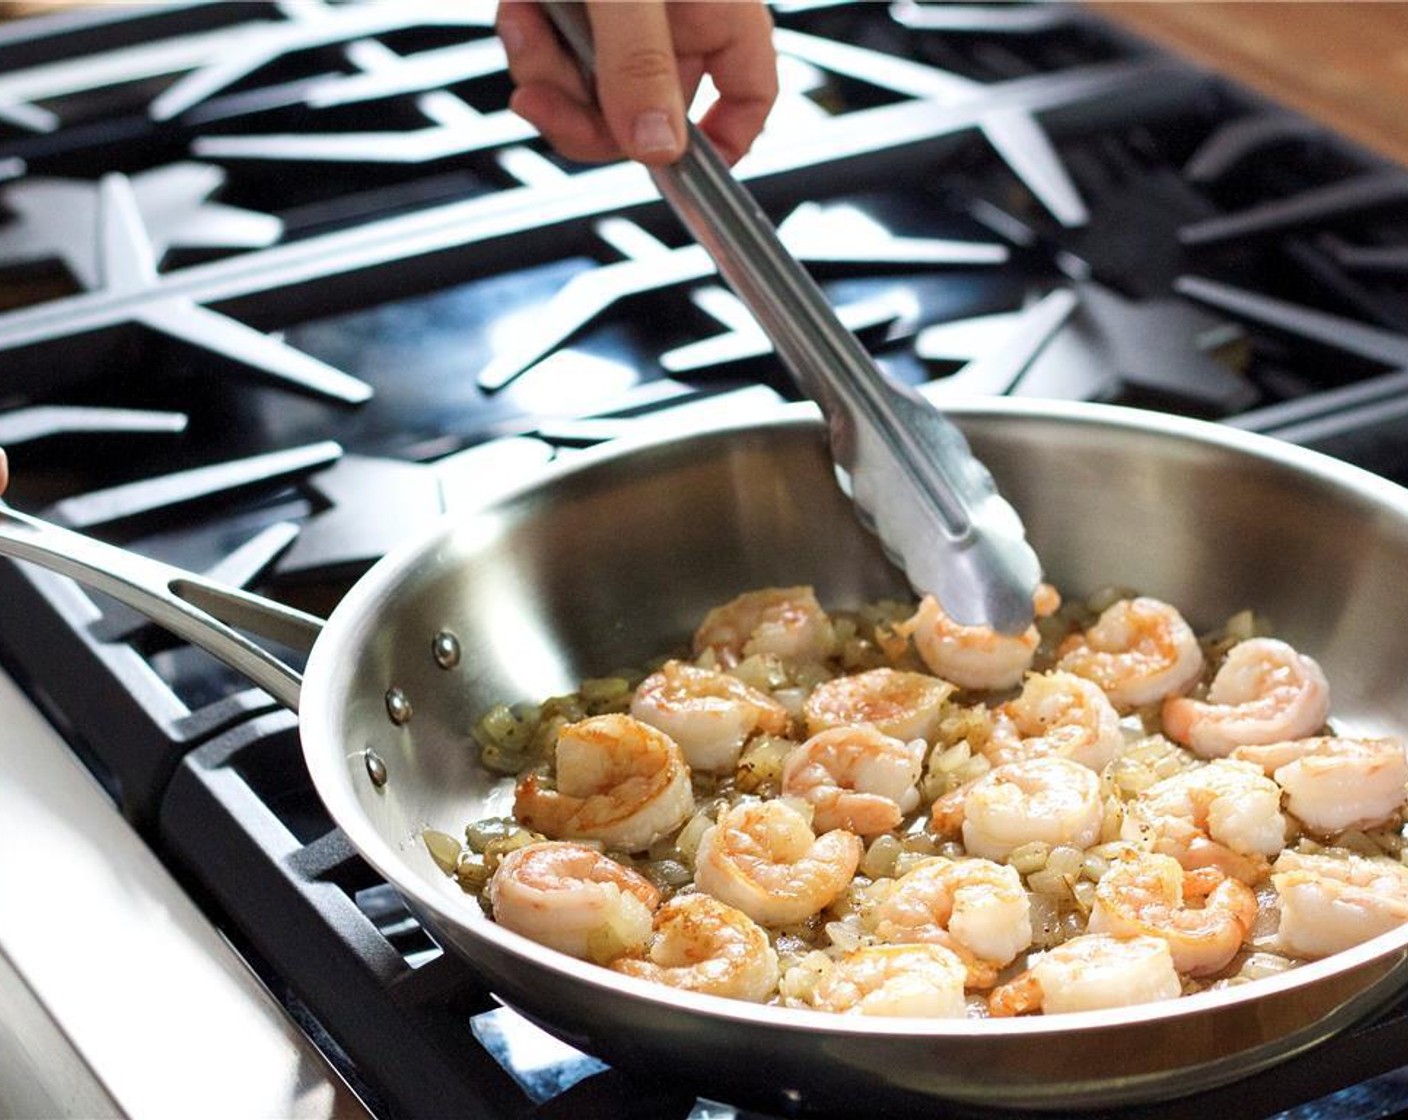 step 5 Meanwhile, pat dry Shrimp (20) with paper towels, and set aside. In a large saute pan over medium high heat, add Olive Oil (2 Tbsp), garlic, onion, Salt (1/2 tsp) and Ground Black Pepper (1/4 tsp). Cook all together, stirring frequently.